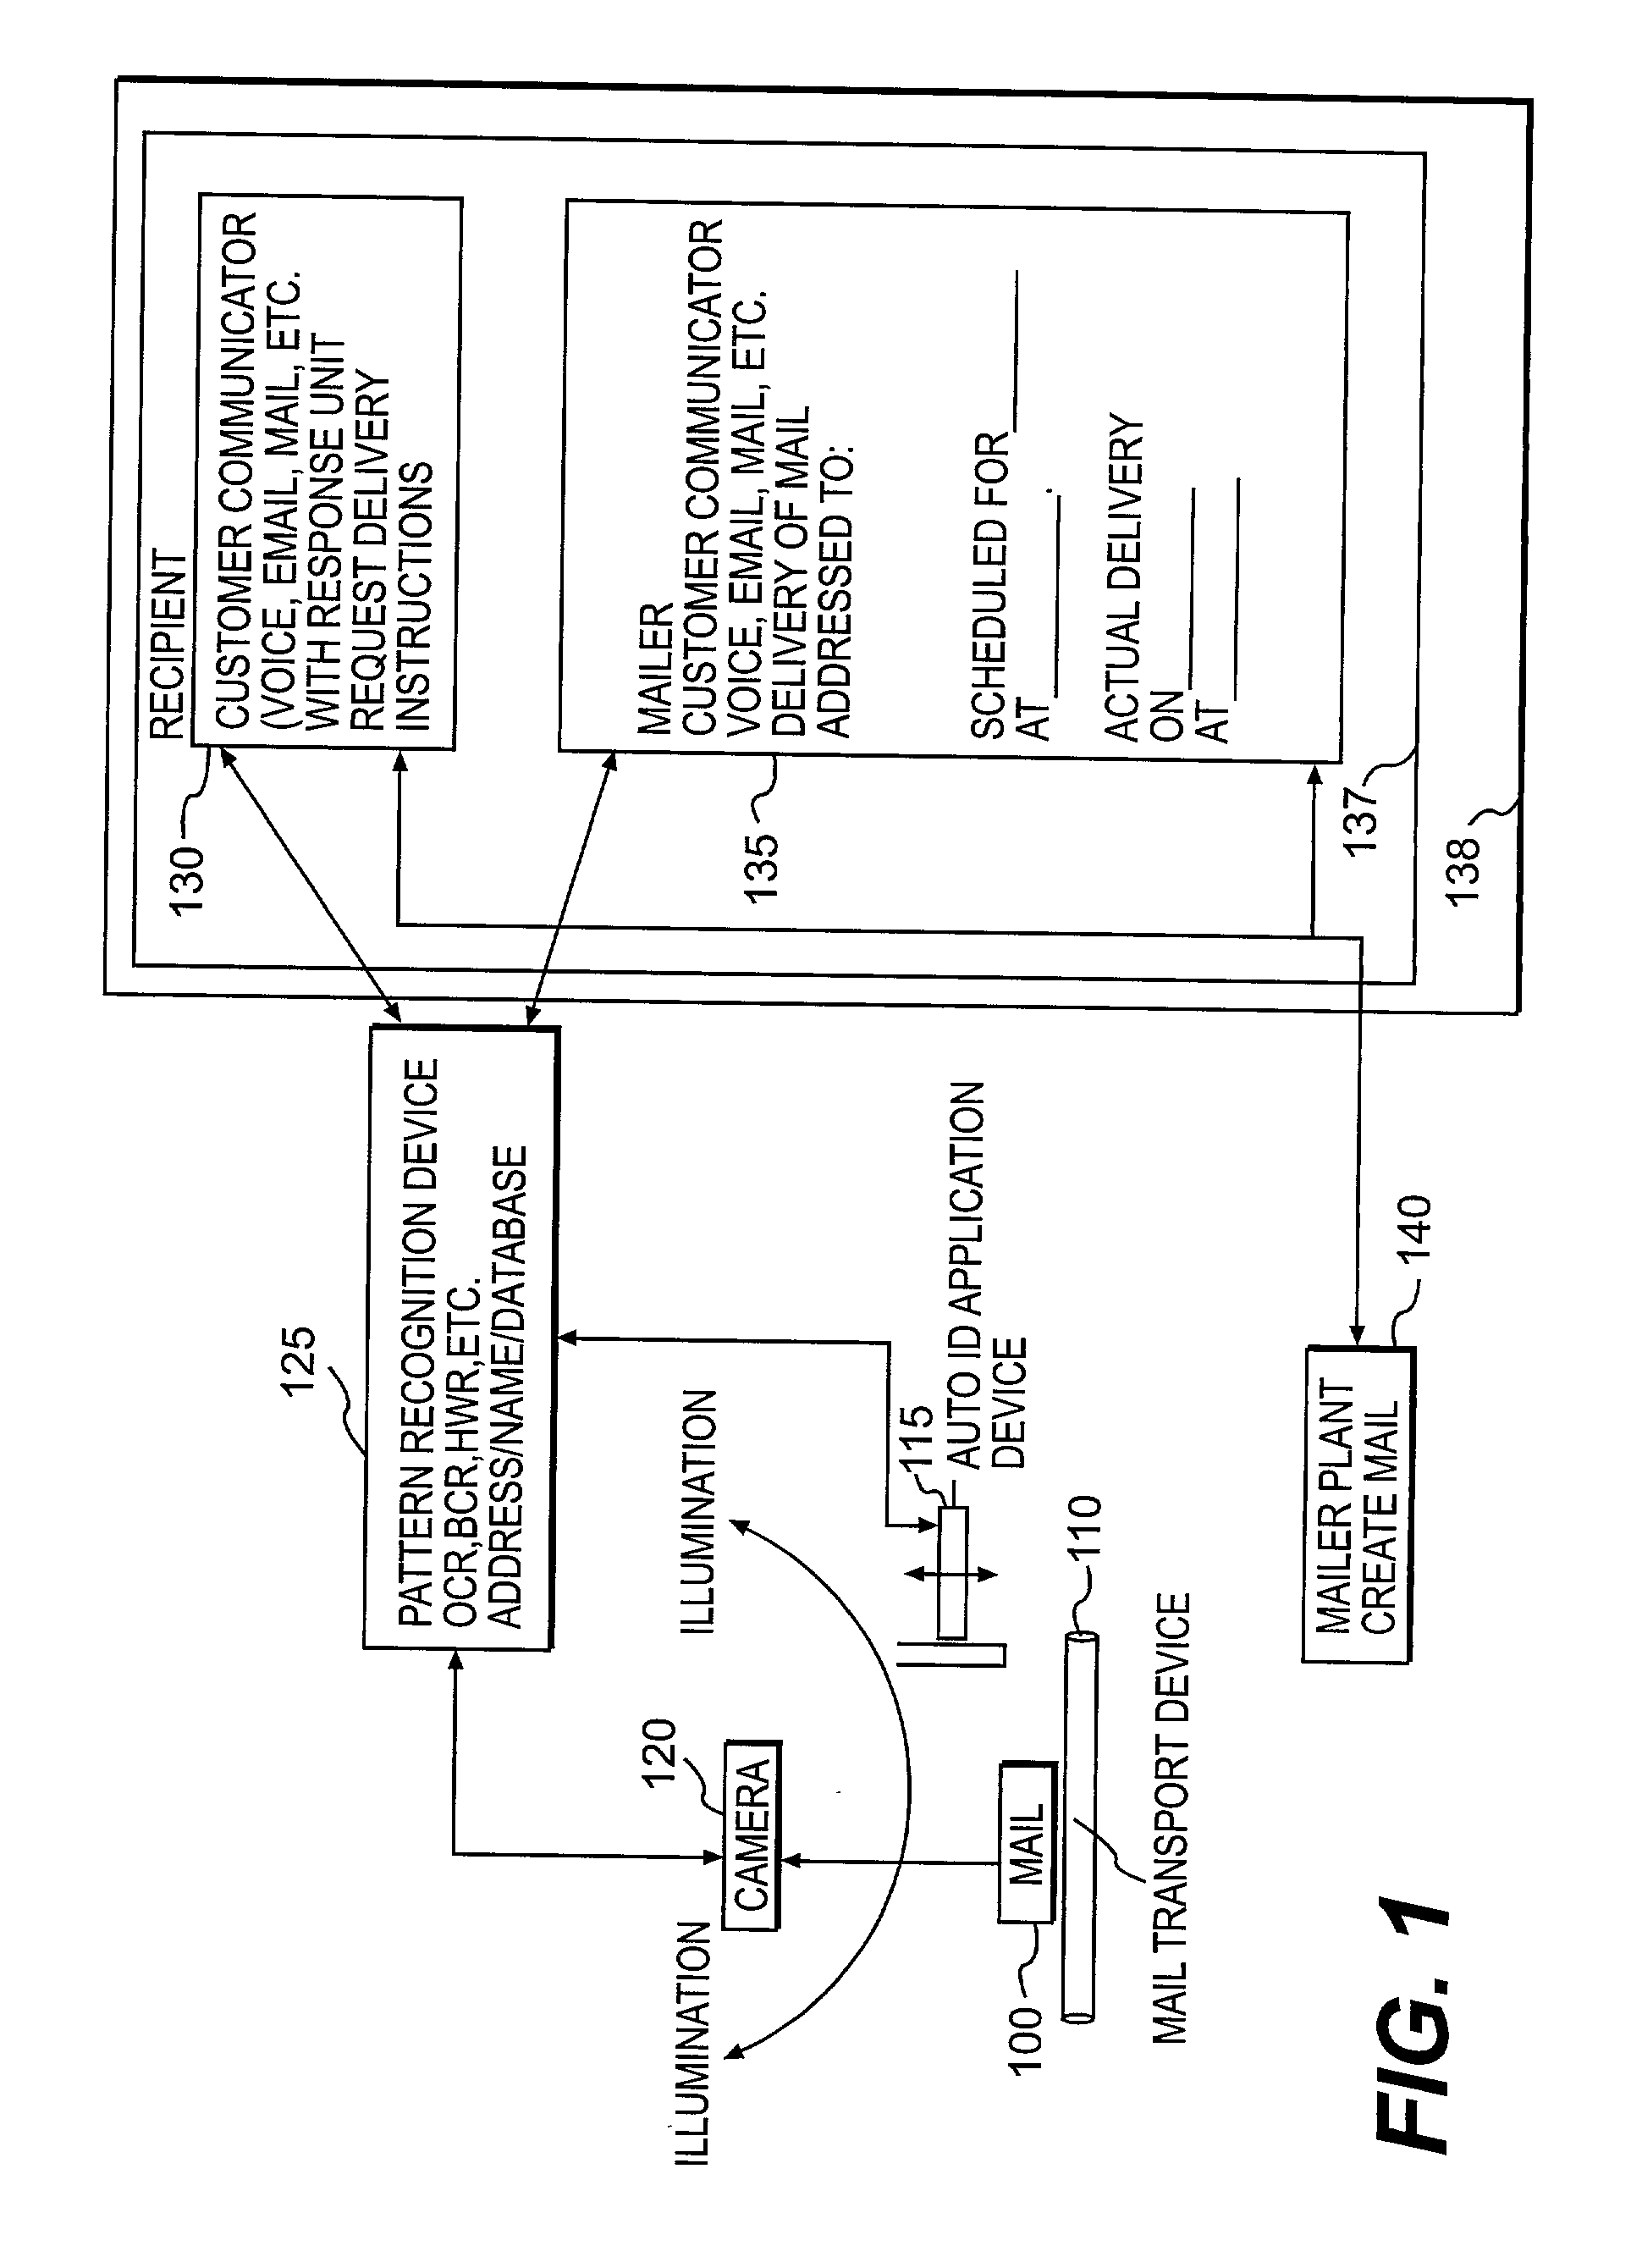 Flexible mail delivery system and method